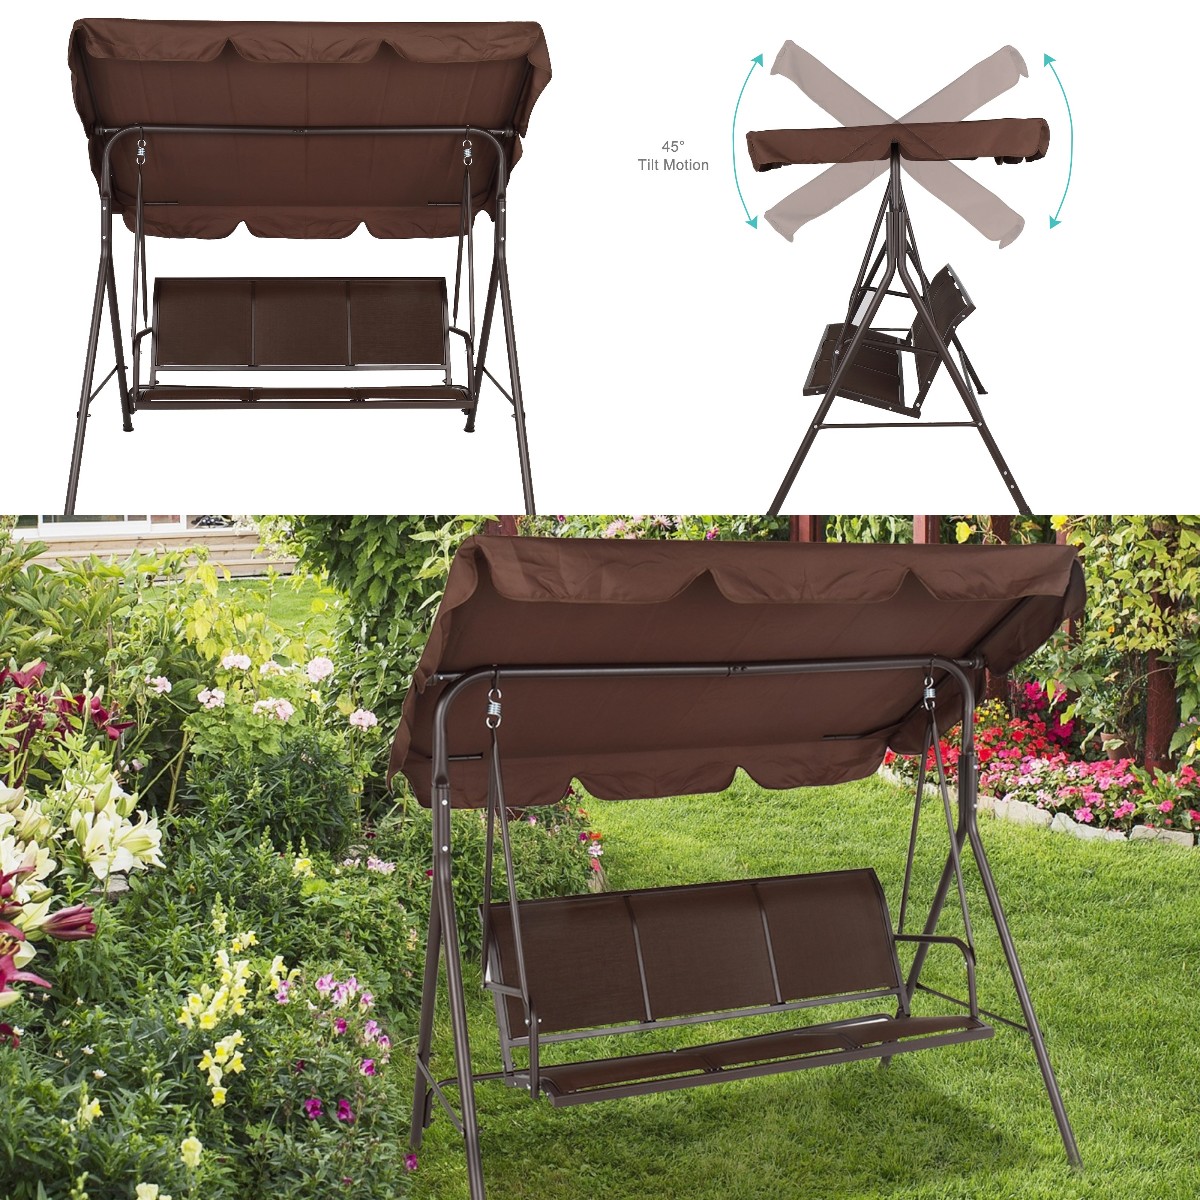 Goorabbit Swing Chair,Outdoor Hanging Bench,Swing Chair With Canopy Teslin Cushion 550lbs Load-Bearing Iron,66.93x 59.84x 26.35",Brown - image 1 of 14